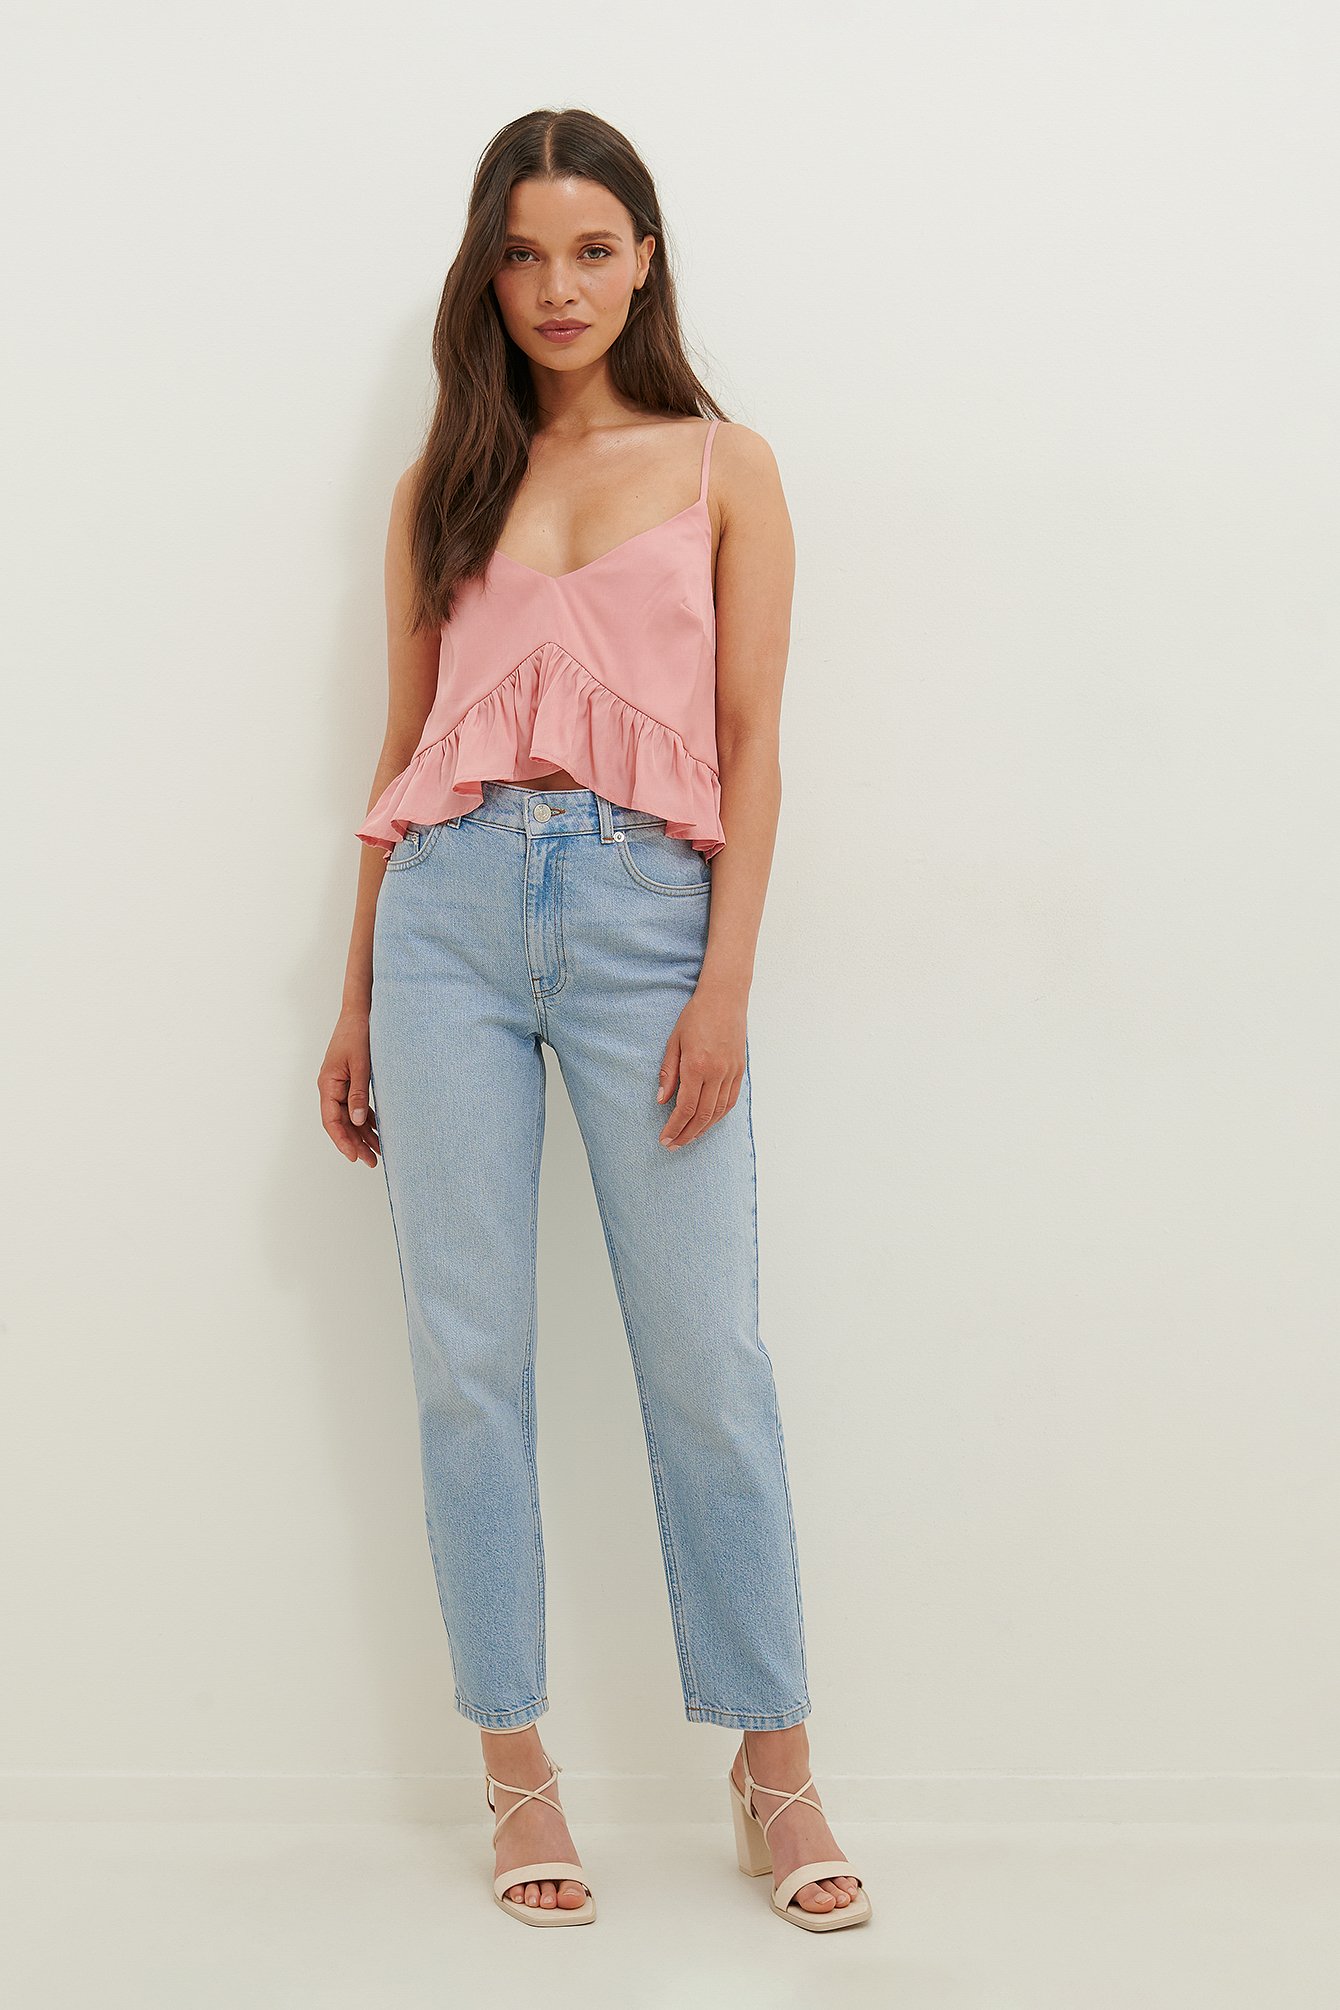 Pink Cropped Frill Top